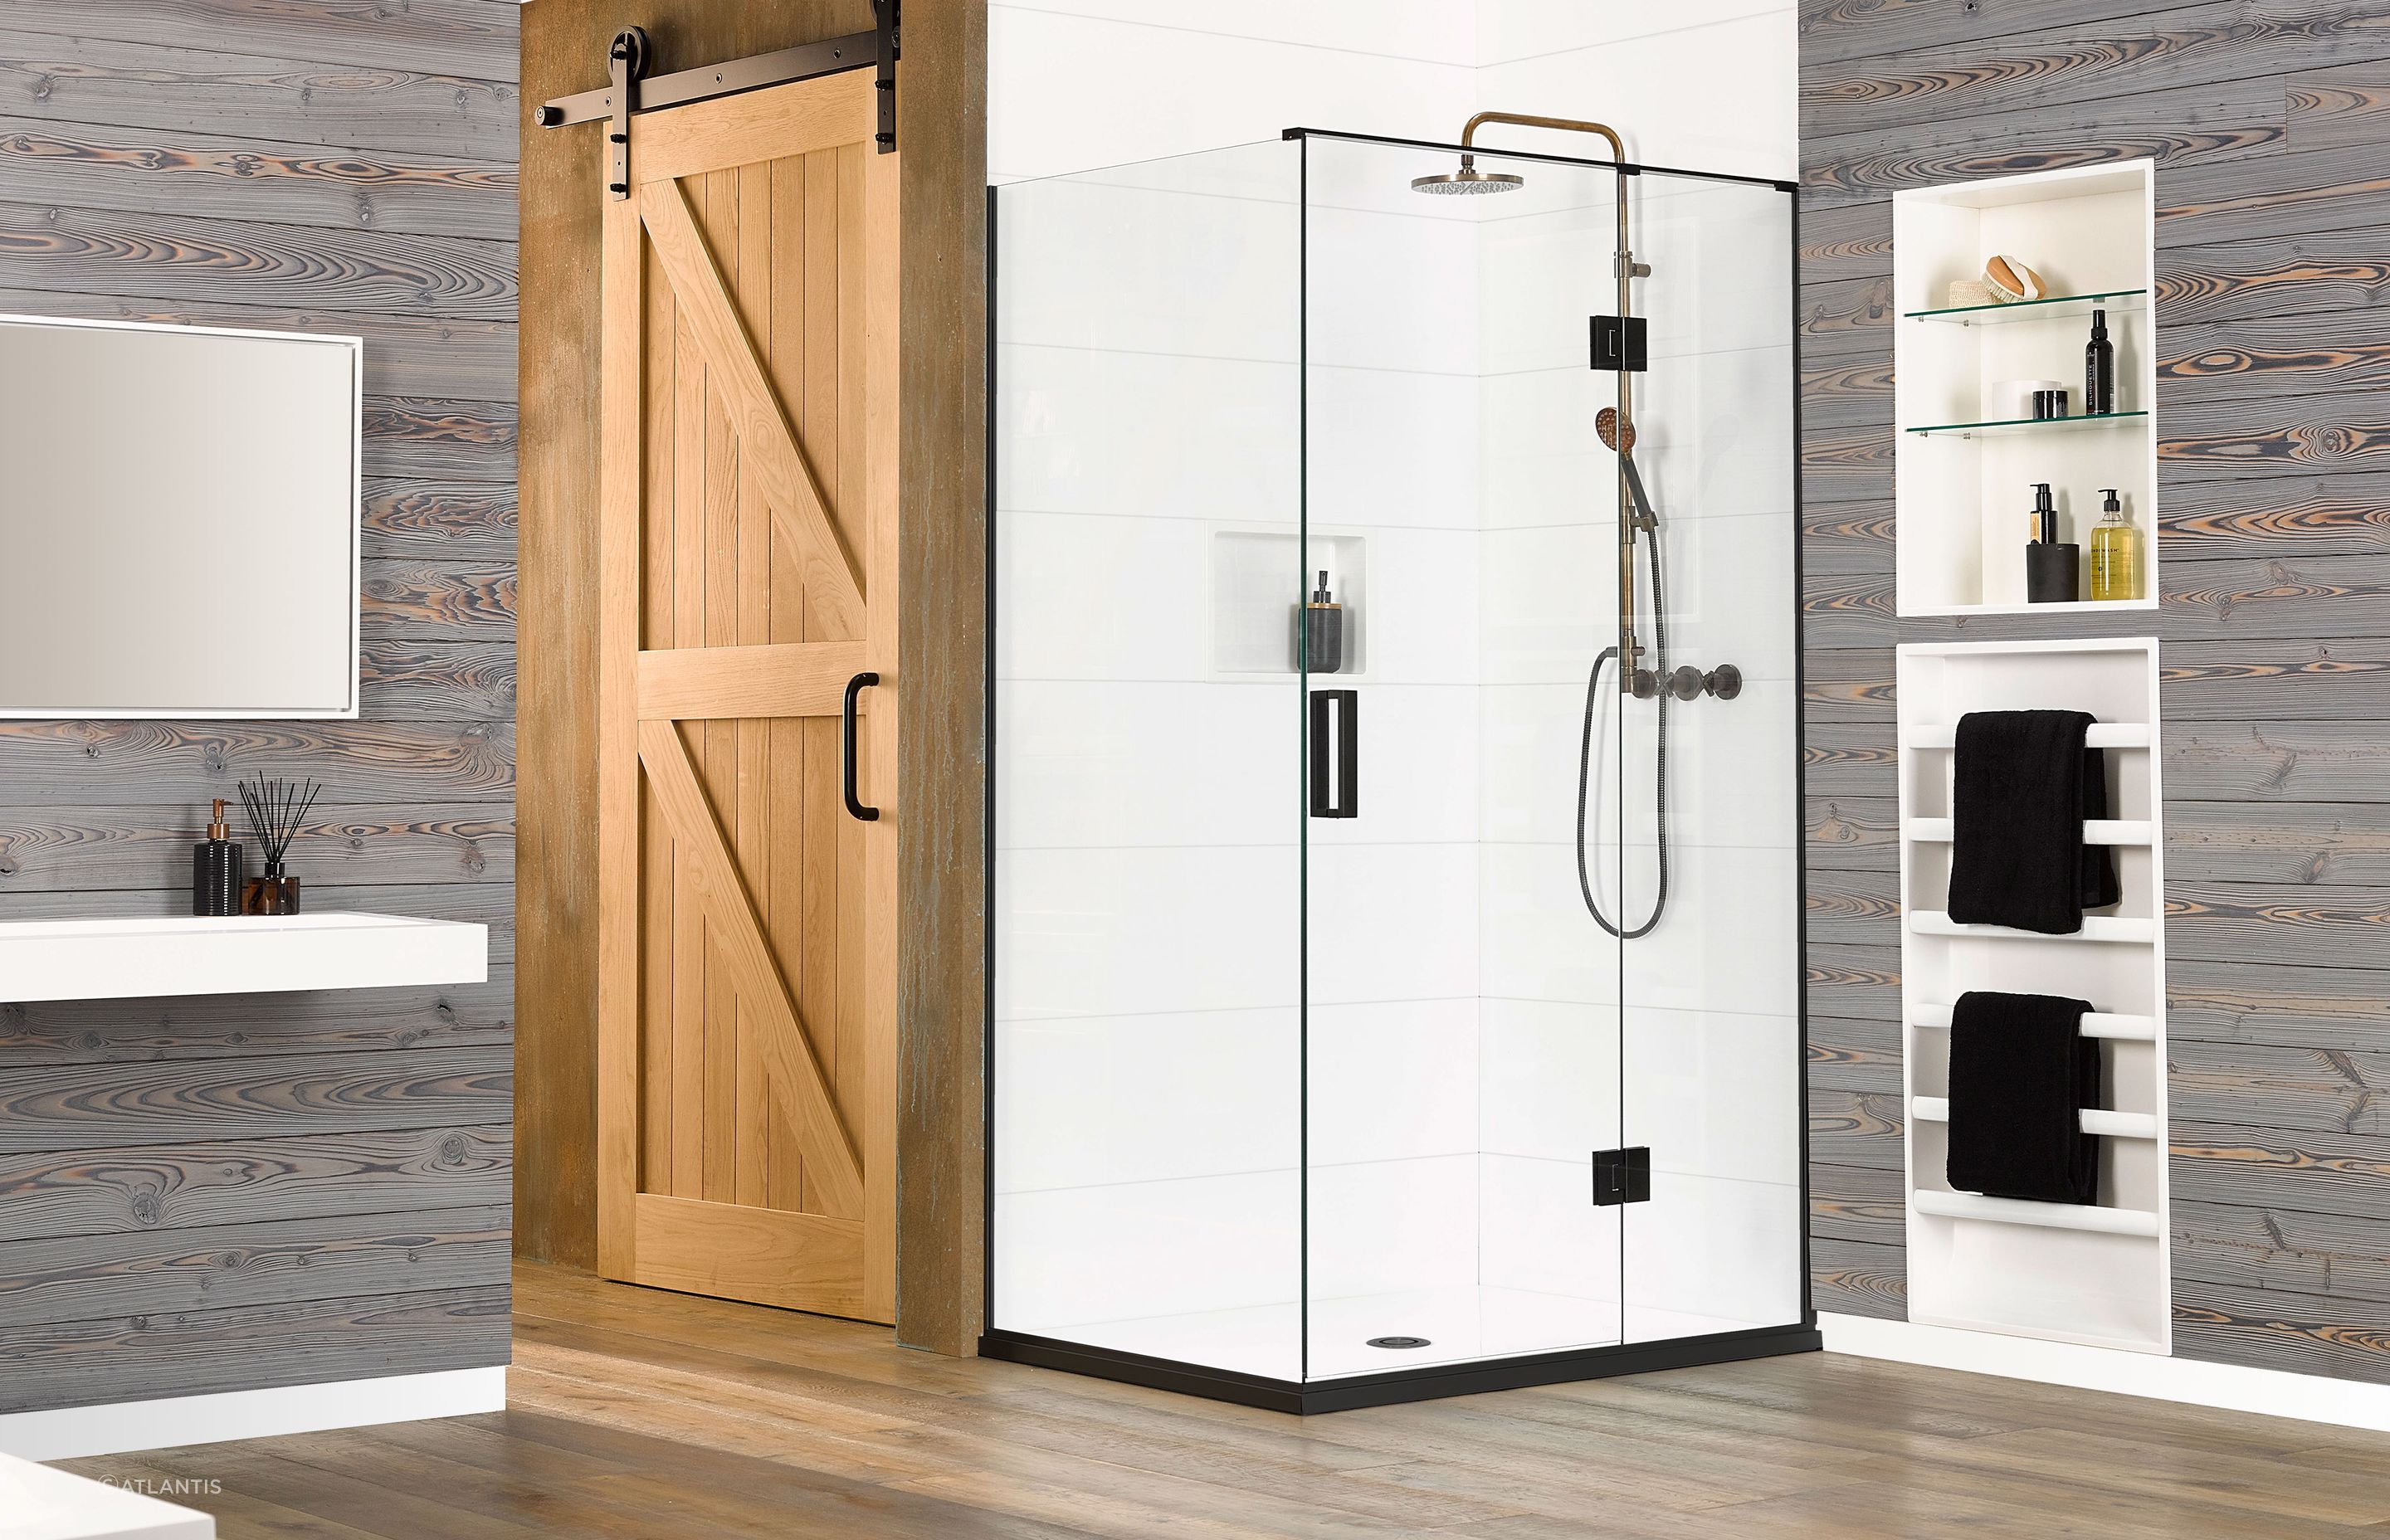 It's easy to spend time in a shower like the Black Pearl, complemented by Ellure Tile Look Walls